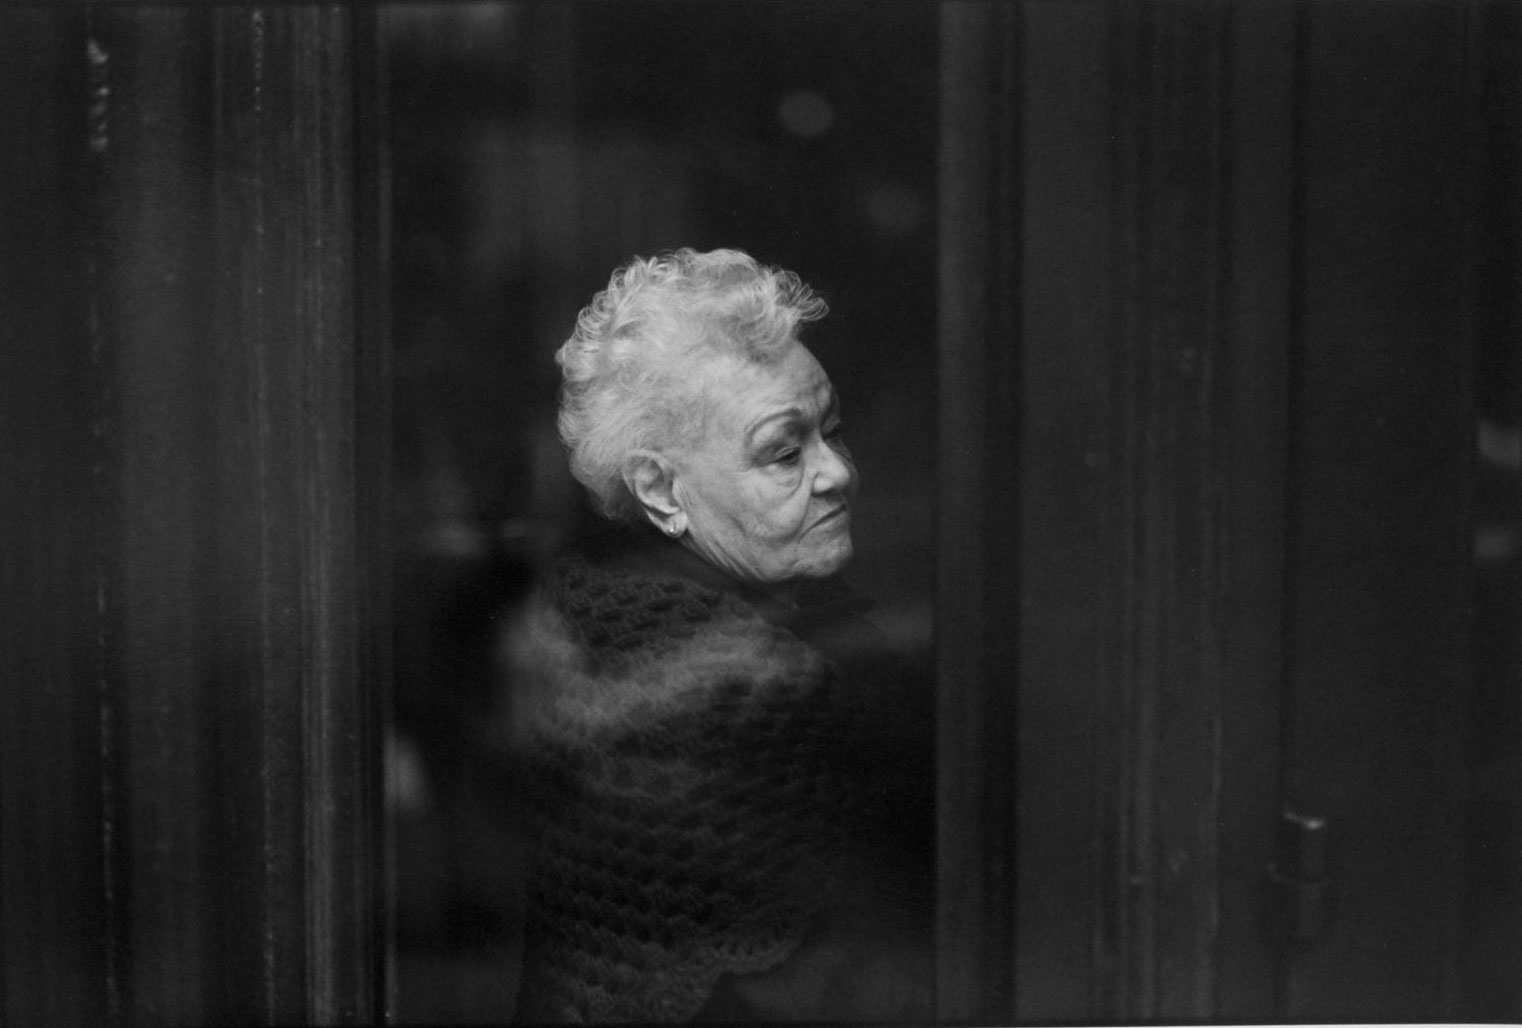 Woman waiting for a bus, Chicago, 1997